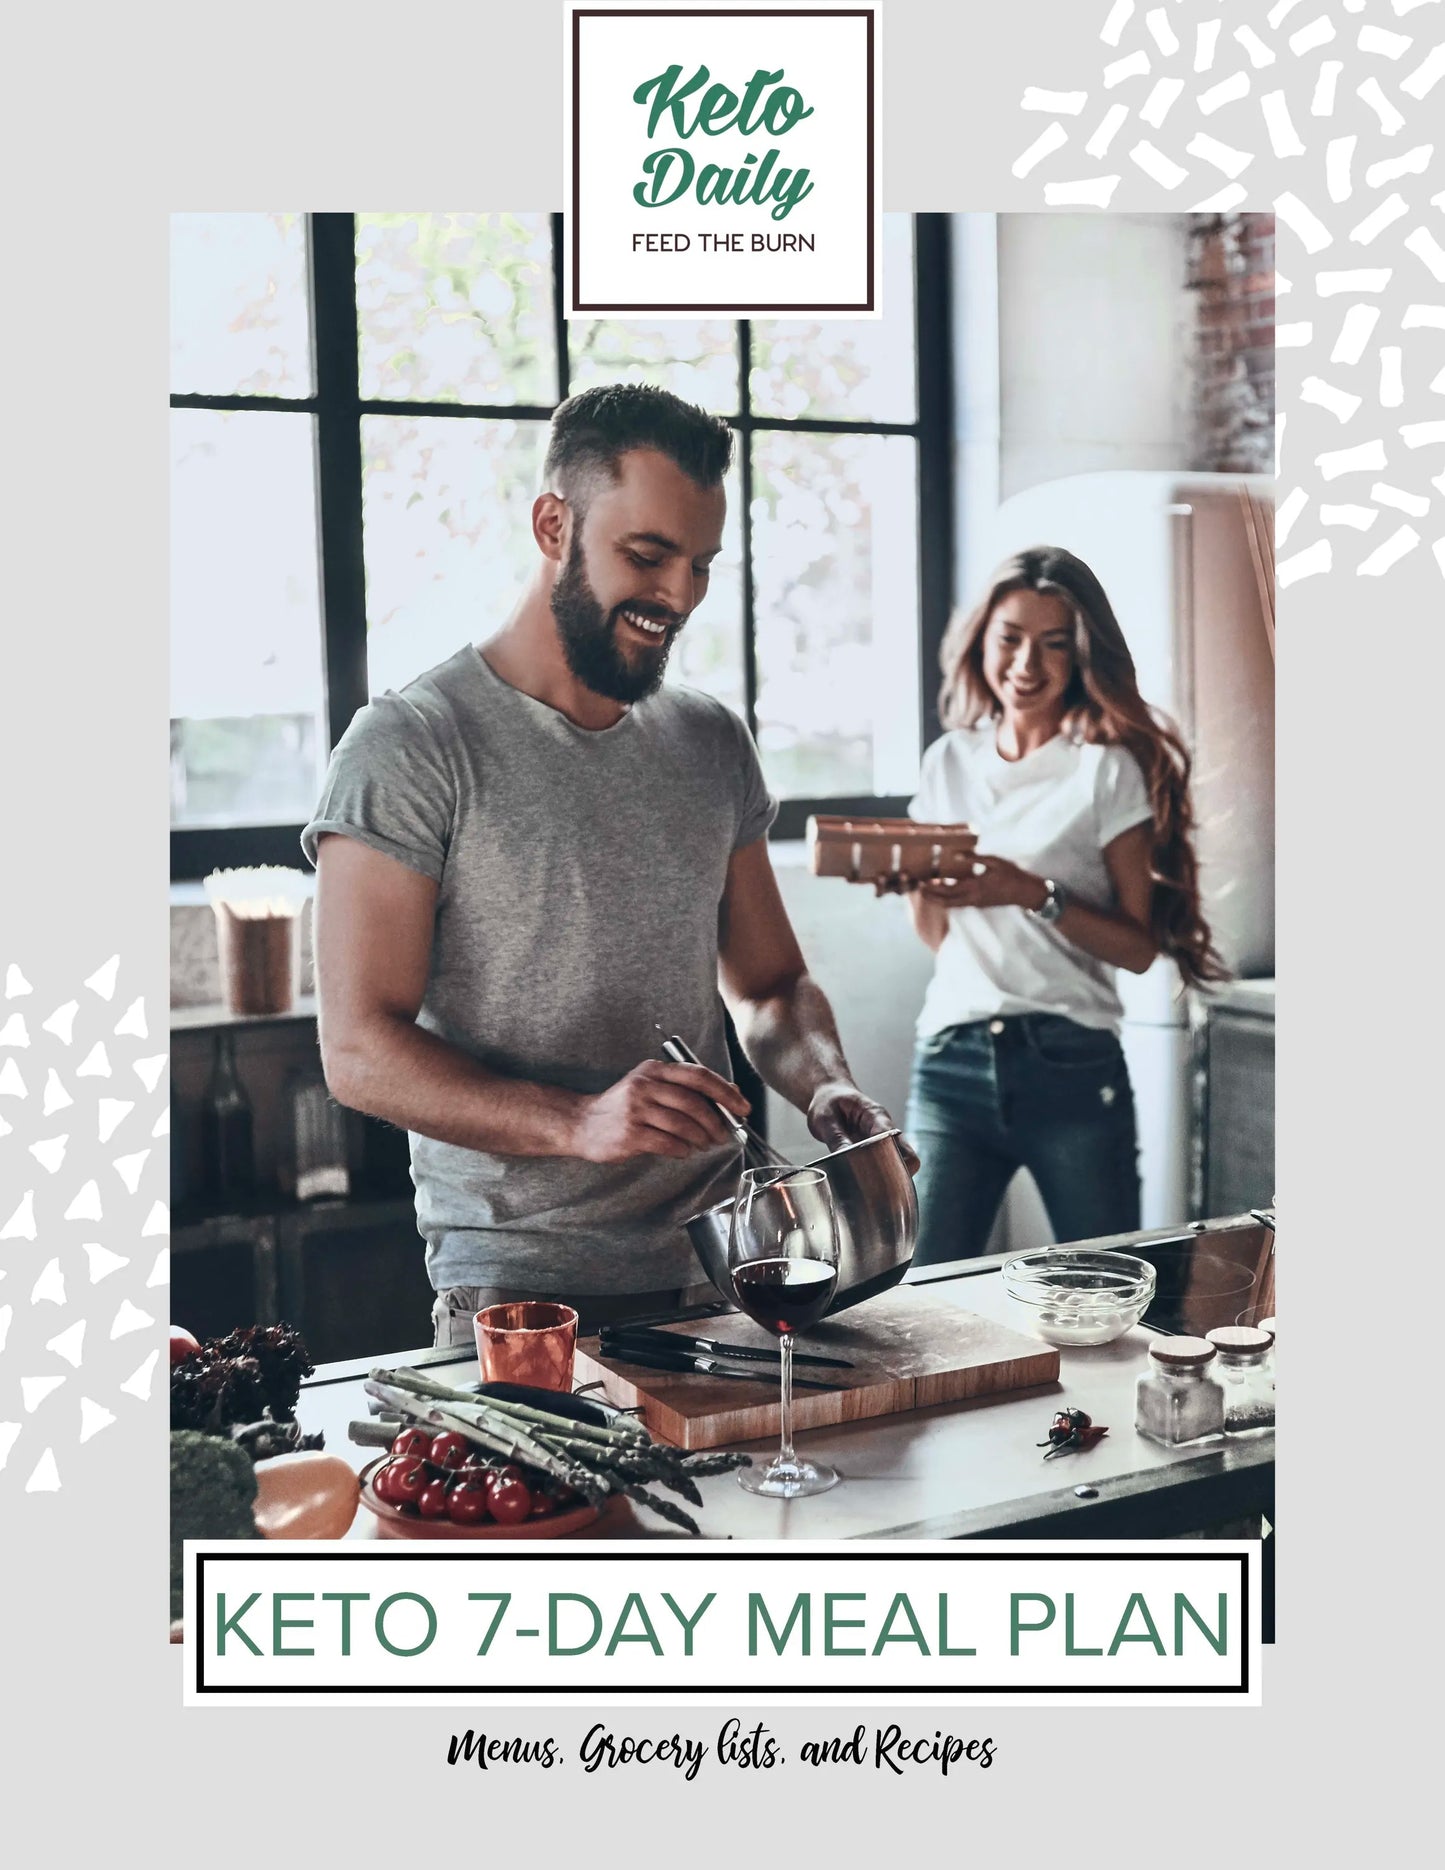 Keto 7-Day Meal Plan Ebook